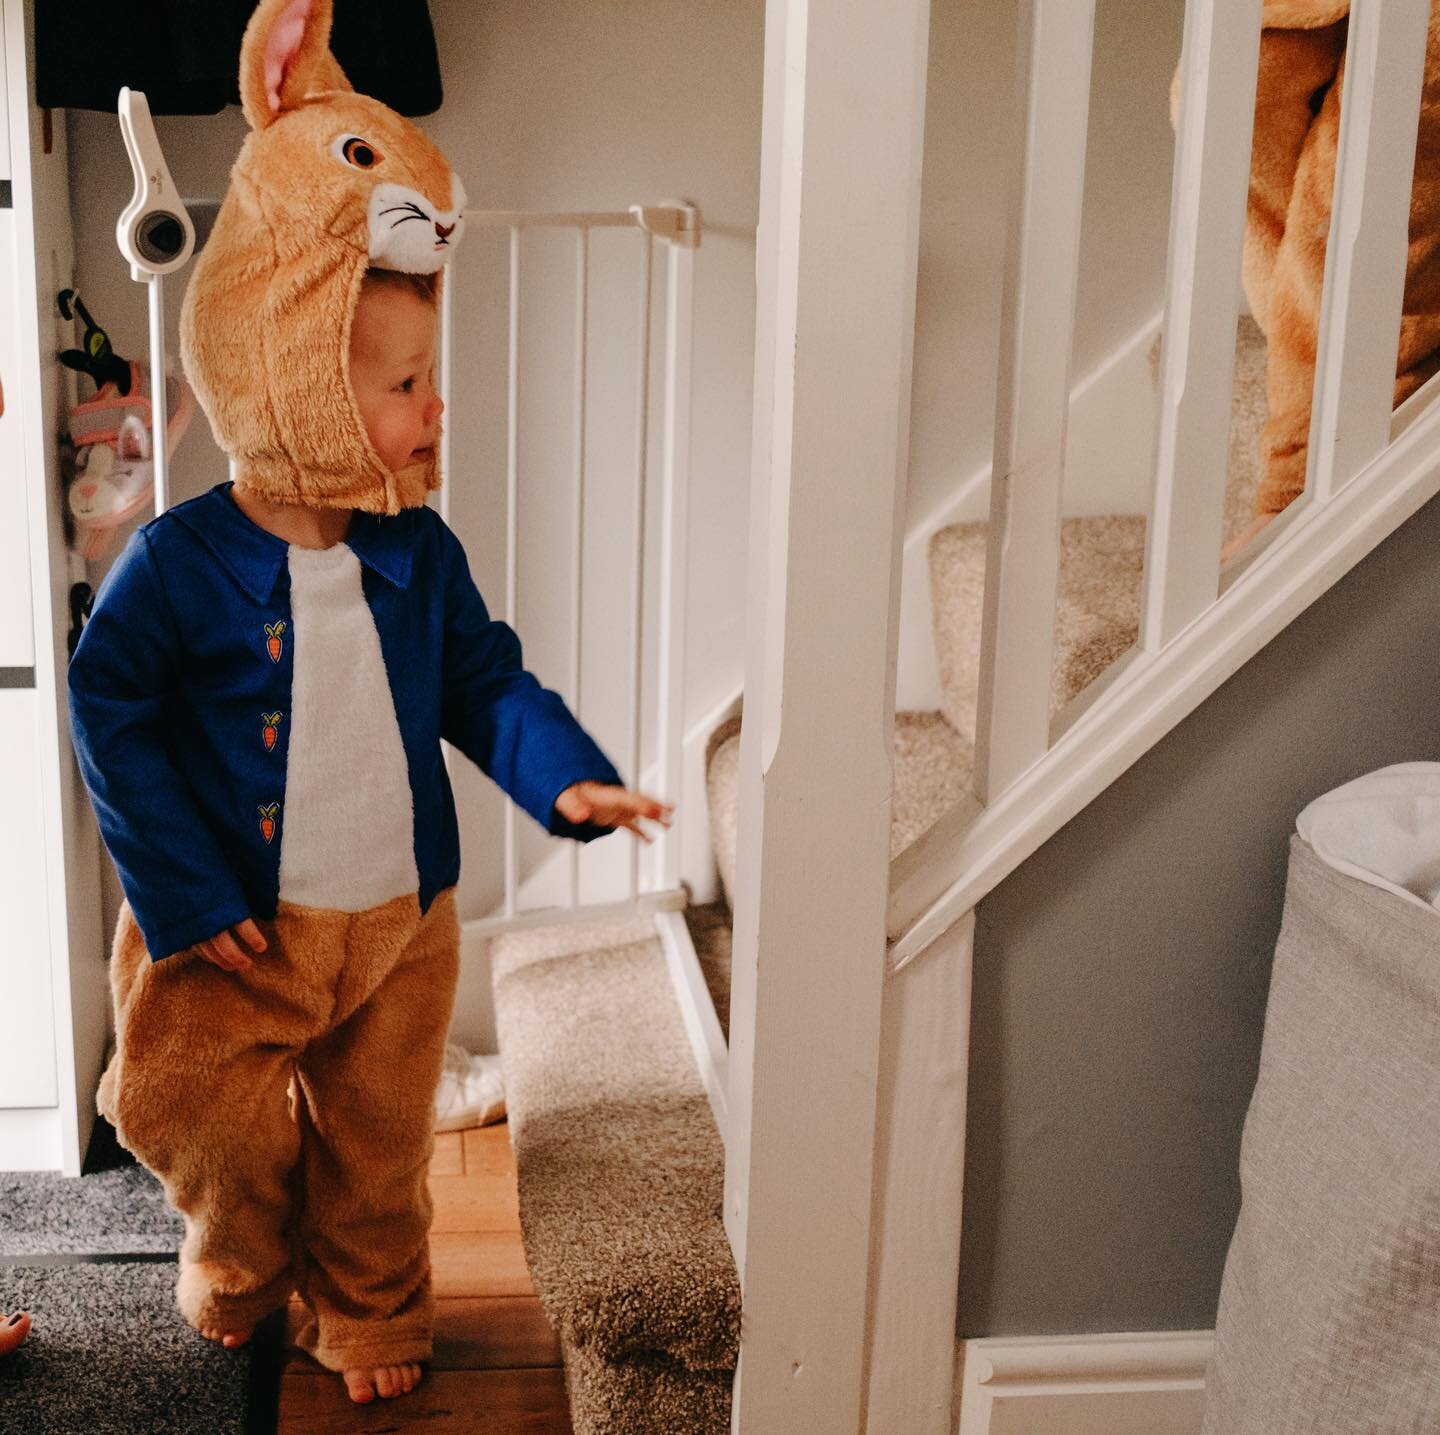 Happy Easter!!
After last years success, this morning saw more excitement in the Hand household than Christmas Day. First thing, the D&rsquo;s donned their bunny outfits and went on an adventure round the house for their Easter Egg hunt!! They then h